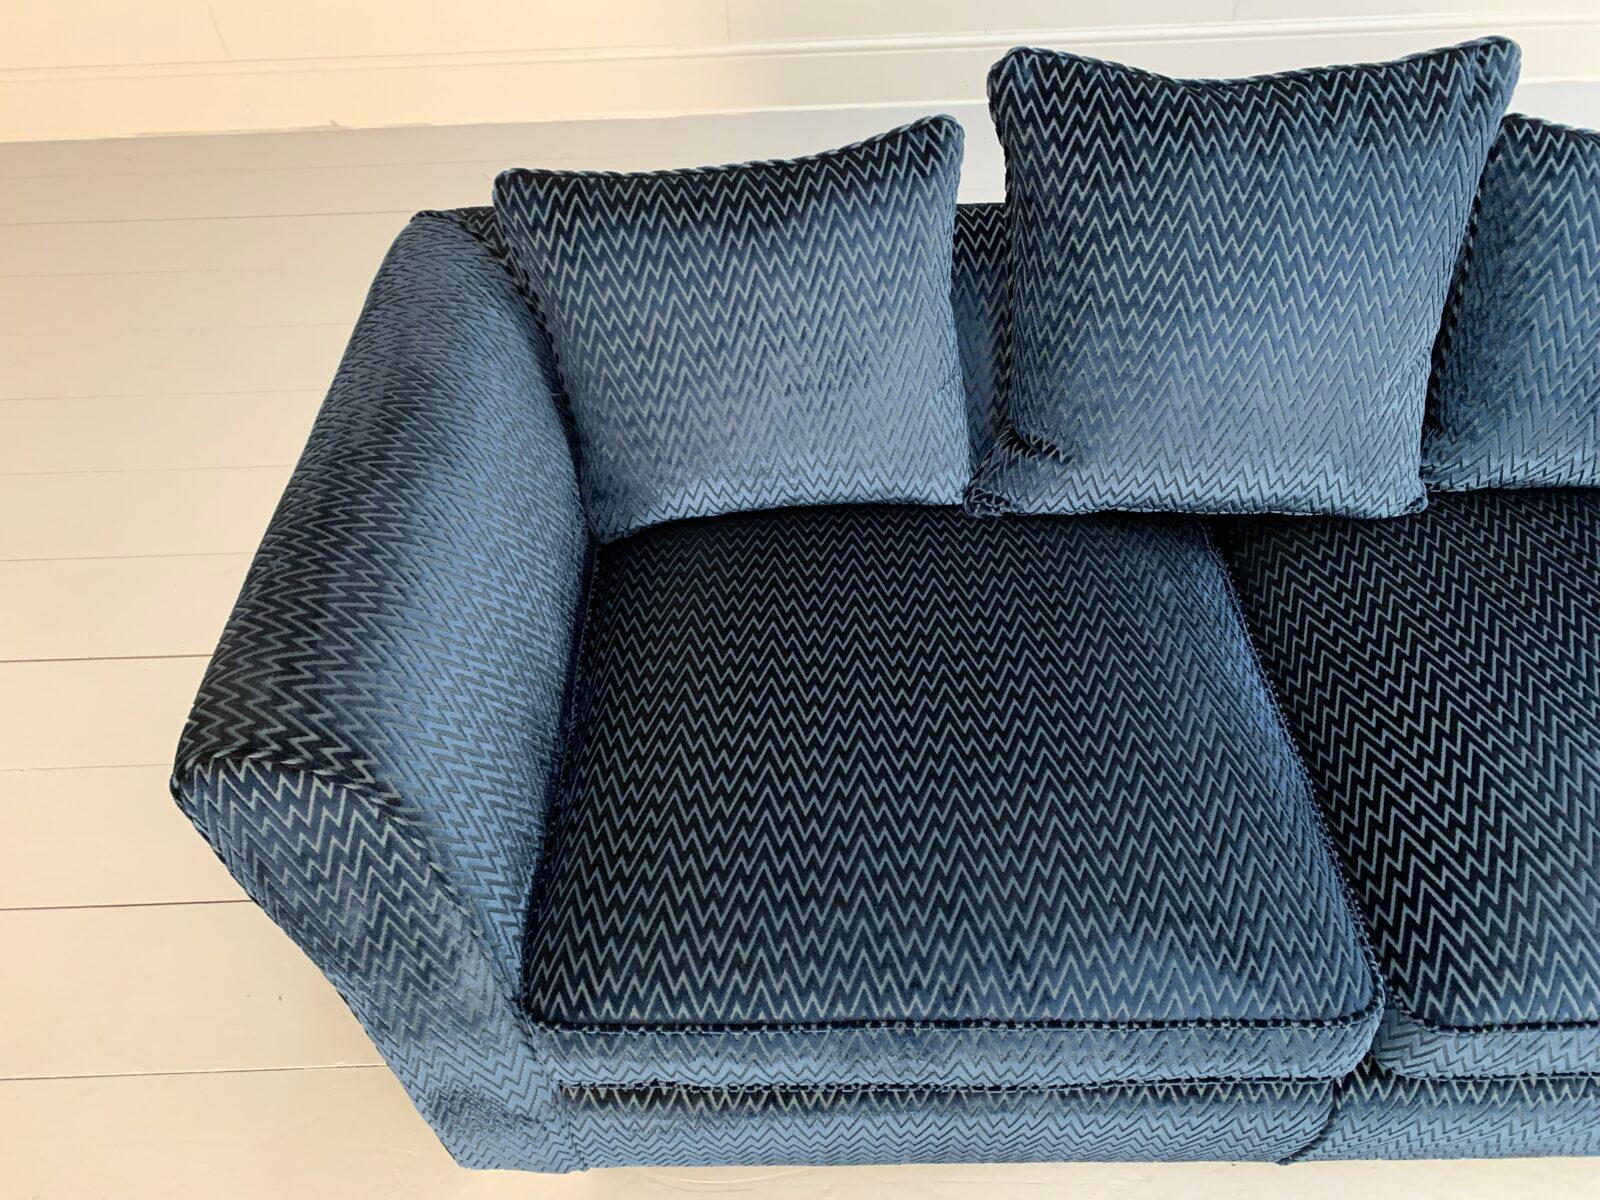 Fendi Casa 4-Seat Chaise-End Sofa - In Navy Blue Zig-Zag Velvet In Good Condition For Sale In Barrowford, GB